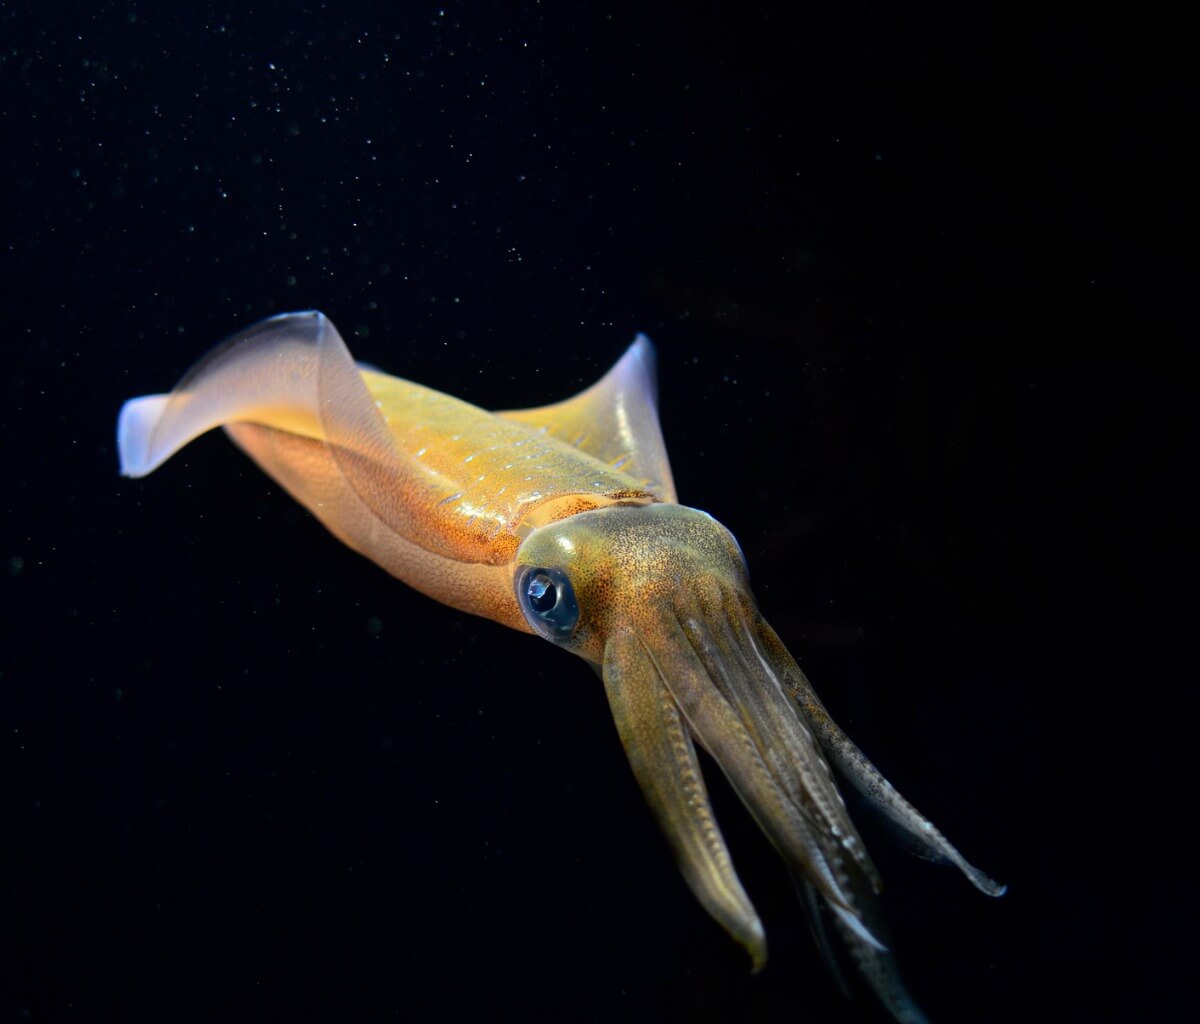 A firefly squid.